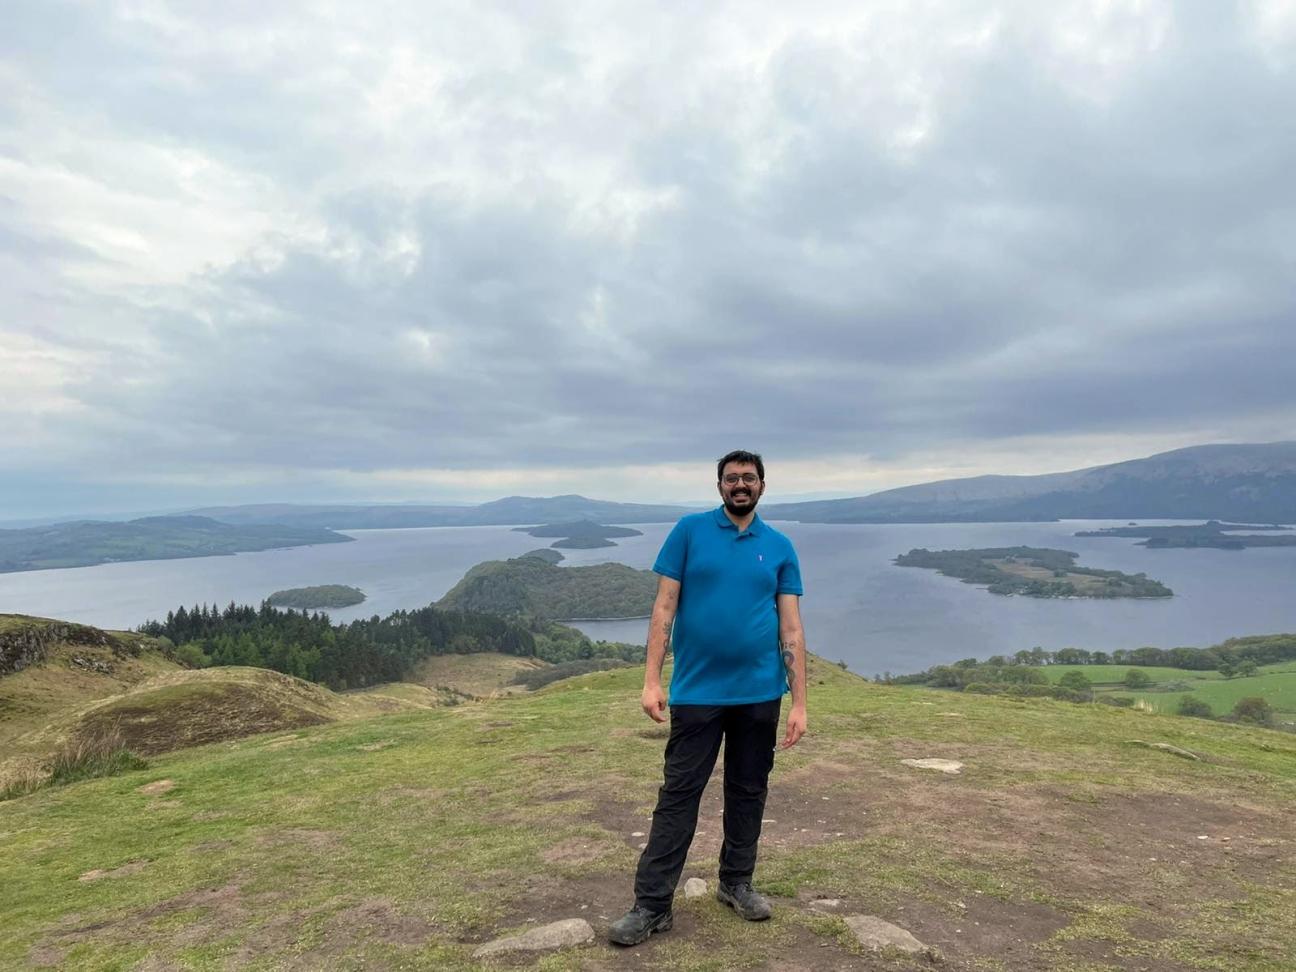 A photo of Osama, the writer of this blog, stood outside in nature with lakes in the background